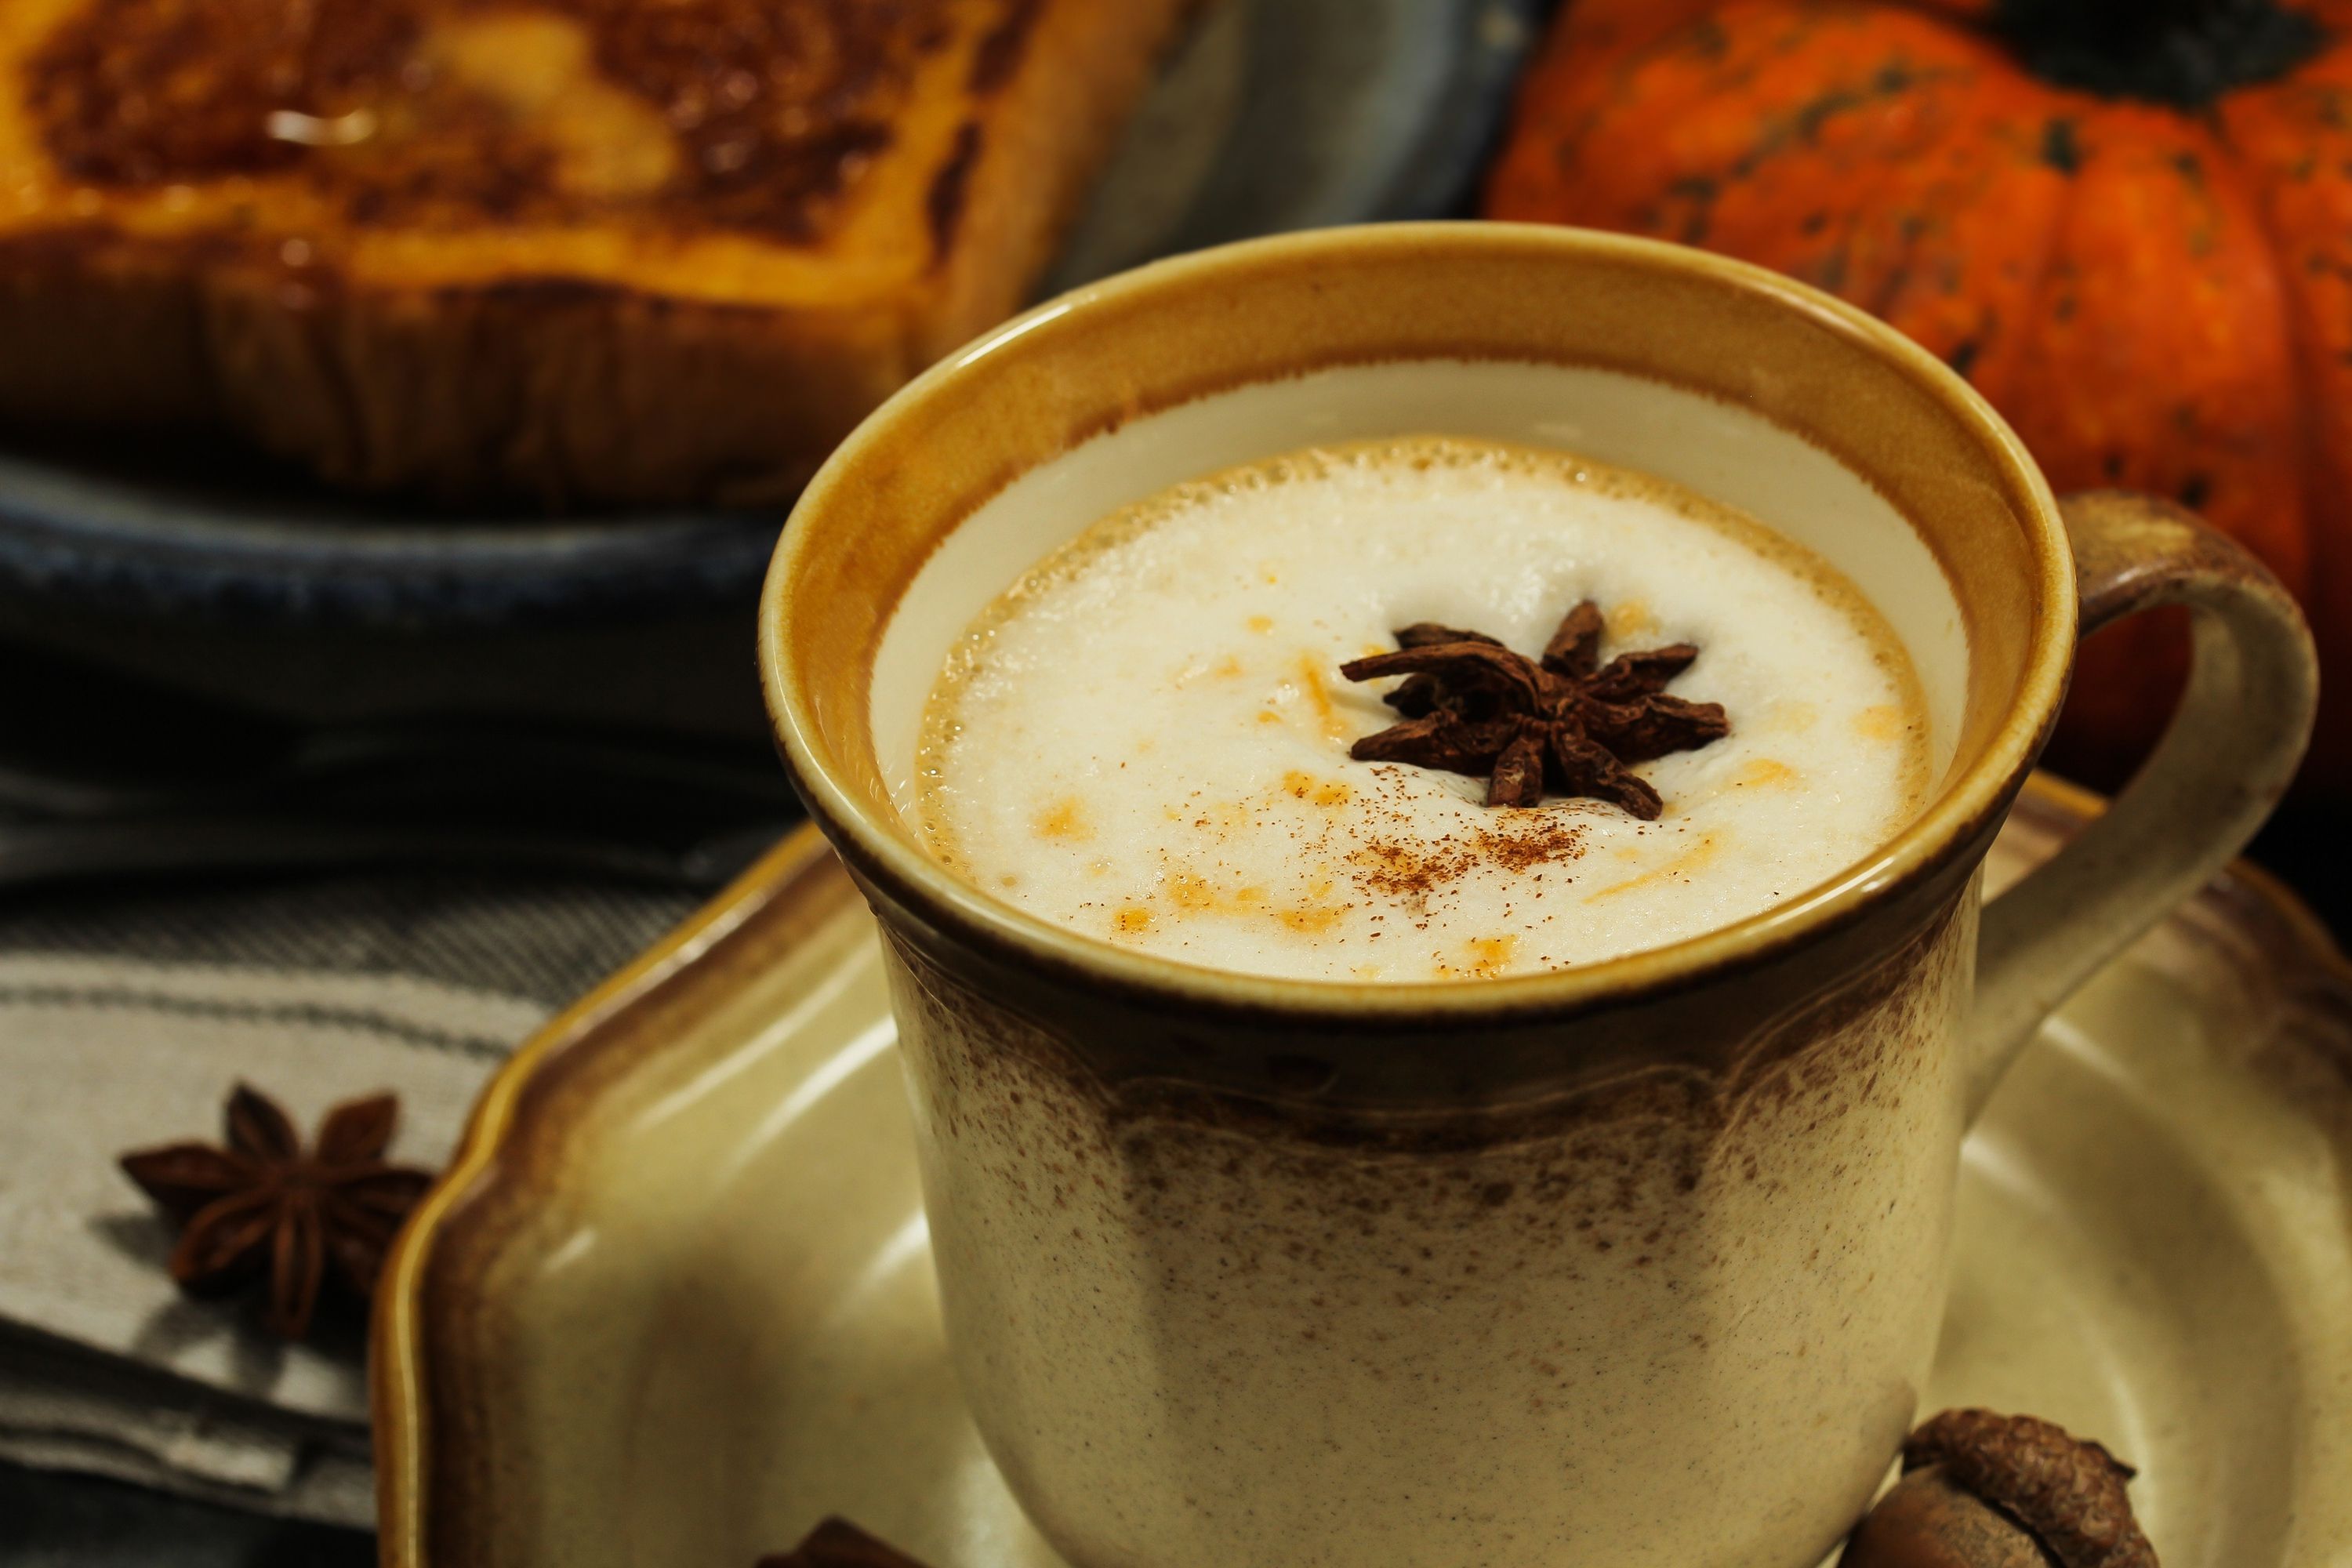 This delicious latte combines your love of chai with your favorite seasonal spice, and it does not disappoint.<p><b><a href="https://www.thegraciouspantry.com/clean-eating-pumpkin-spice-chai-latte/">Get Recipe</a></b></p>